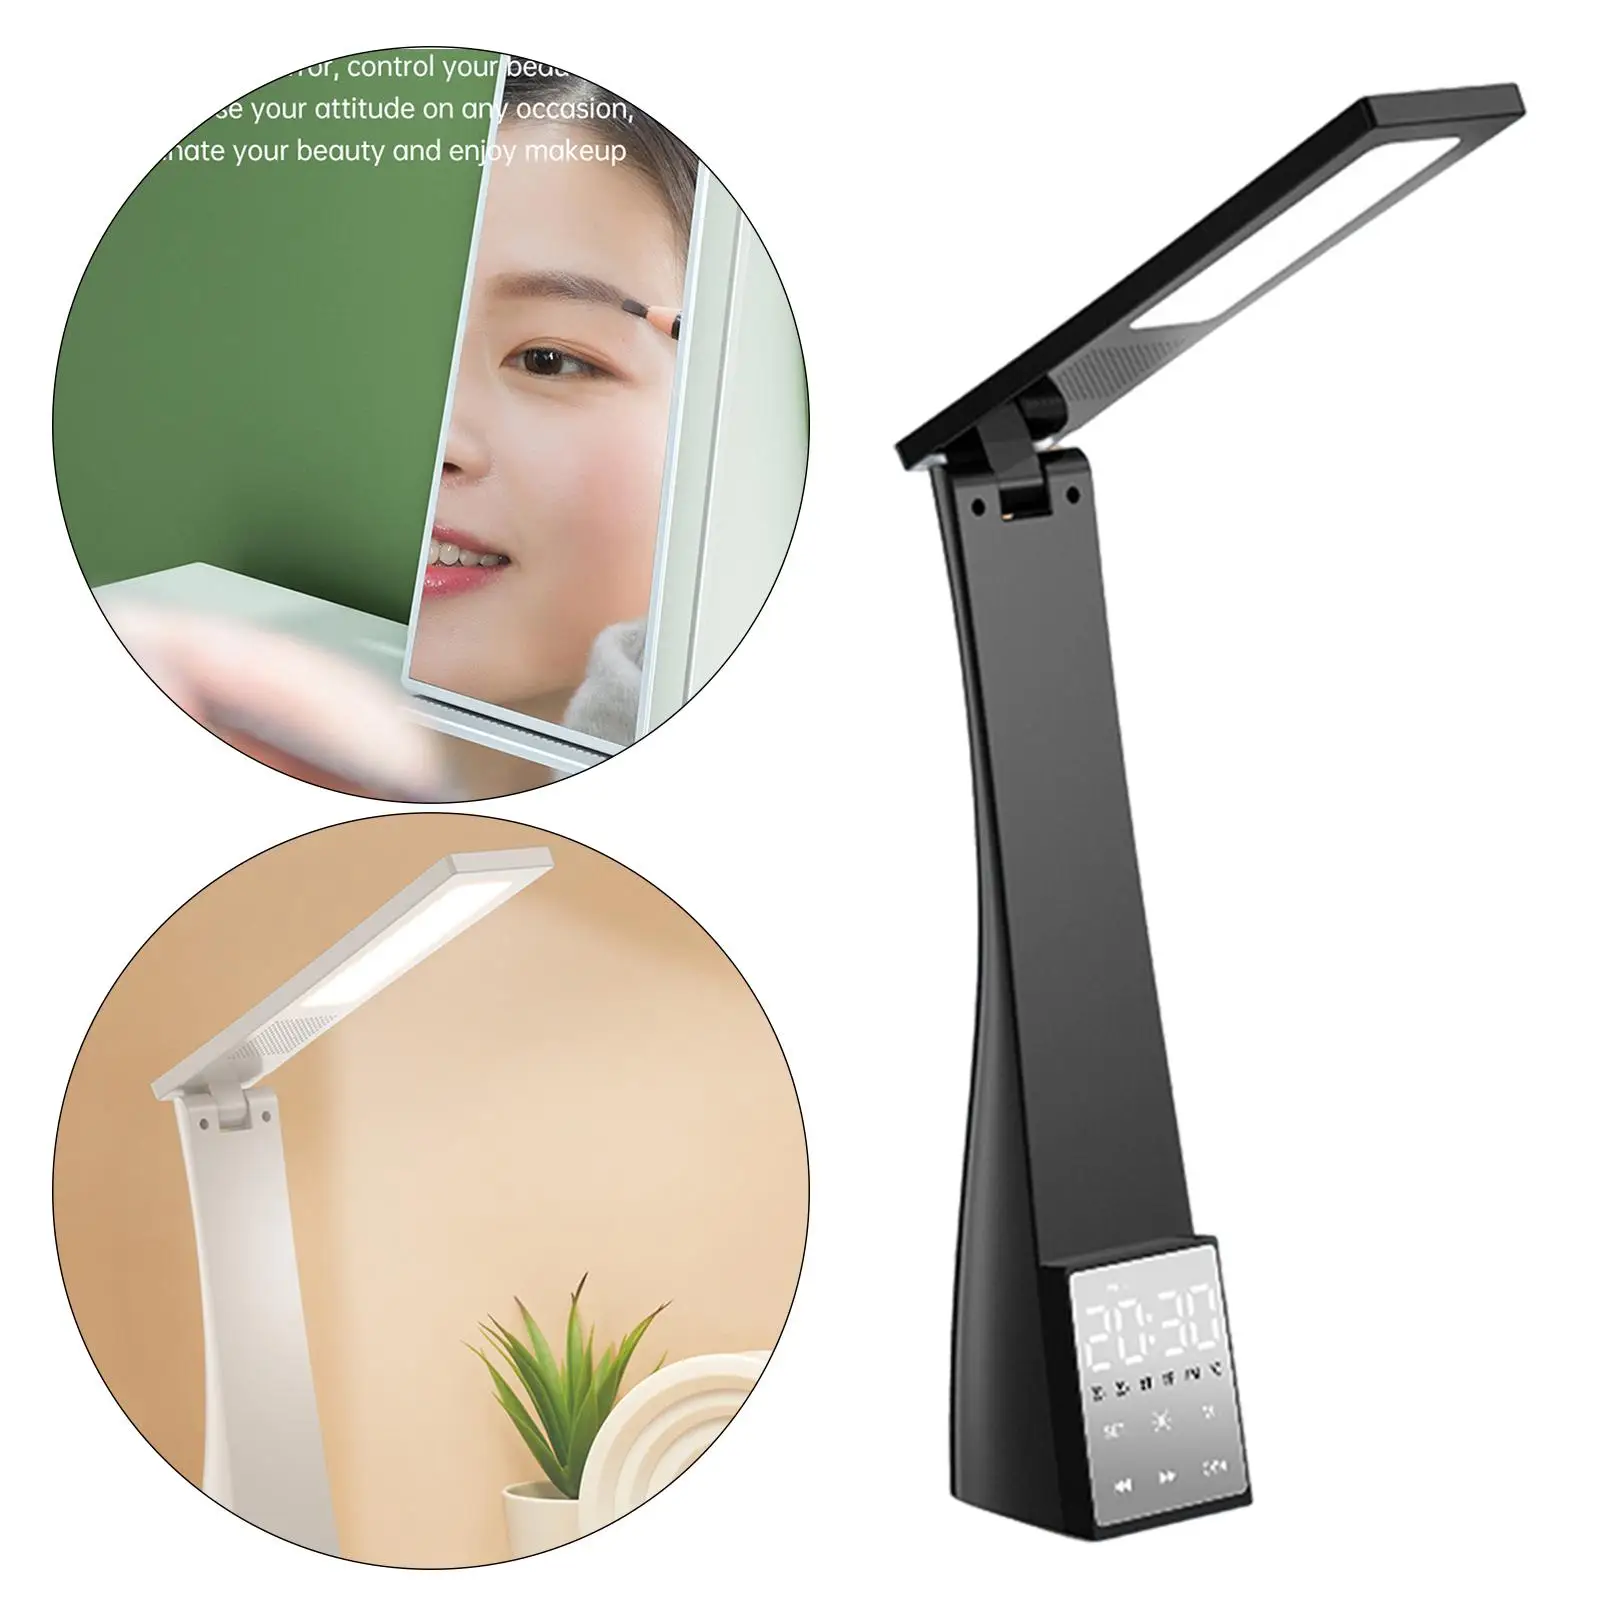 Rechargeable Wireless Desk Lamp with Speaker Alarm Clock Mobile Phone Holder Office